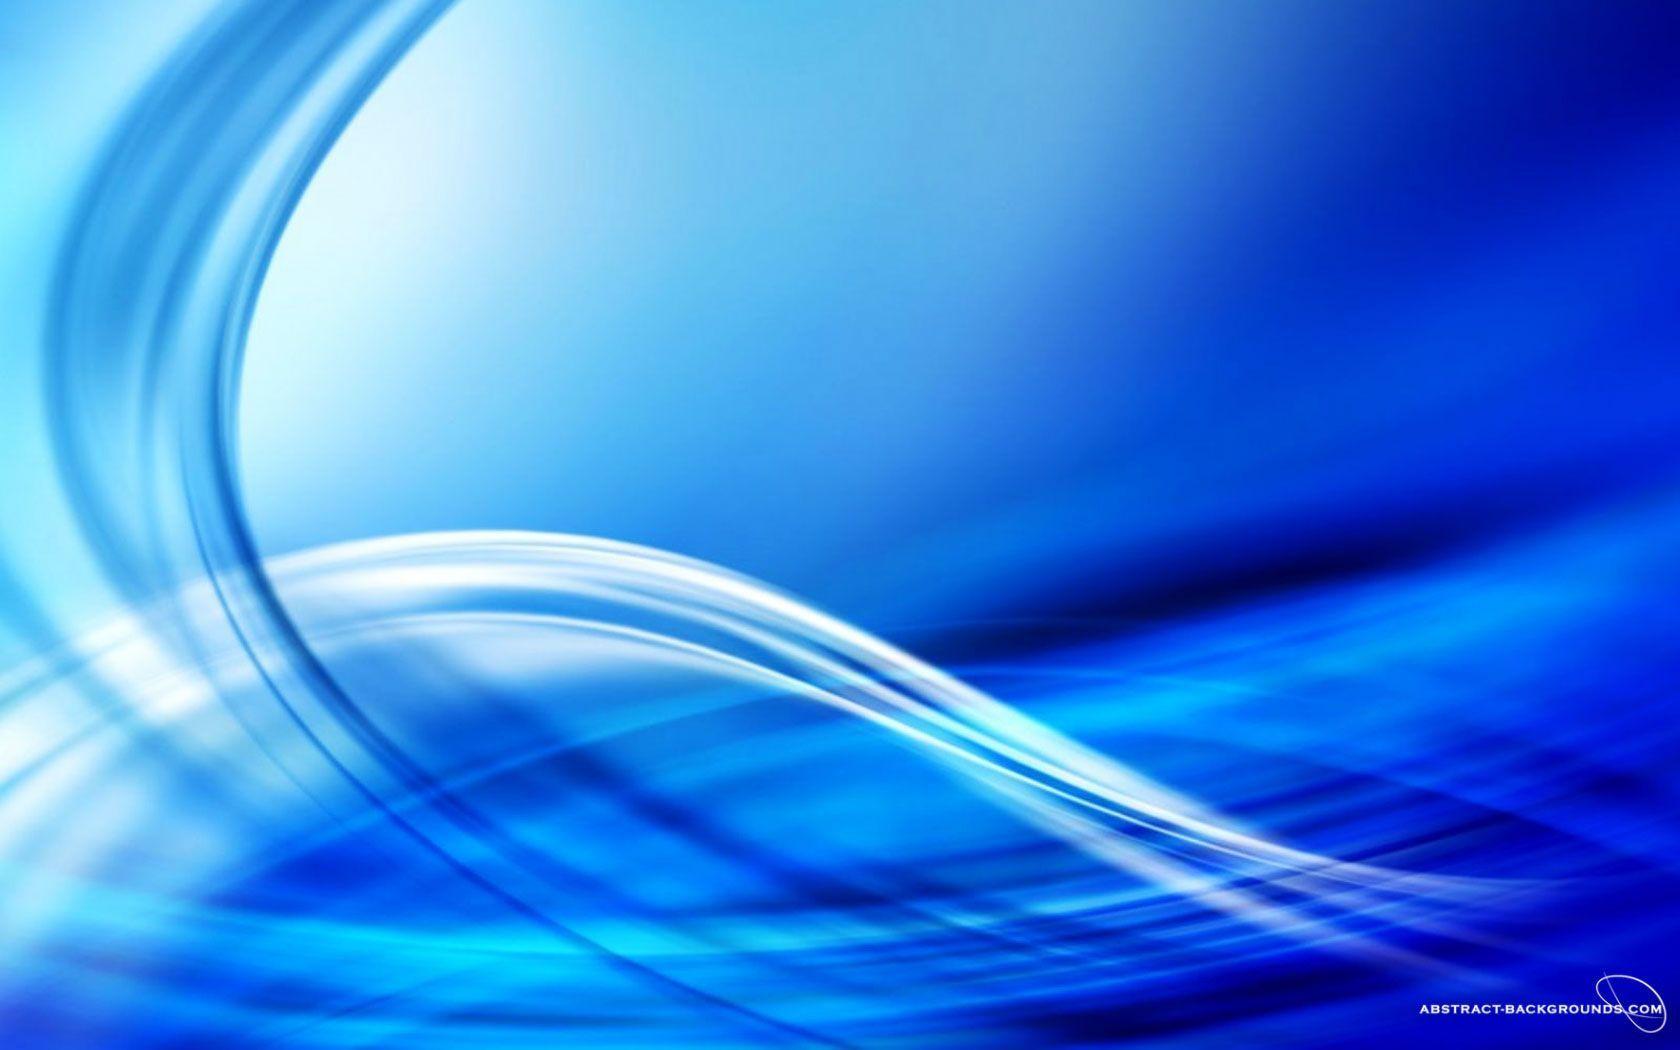 Wallpapers For > Blue Abstract Backgrounds